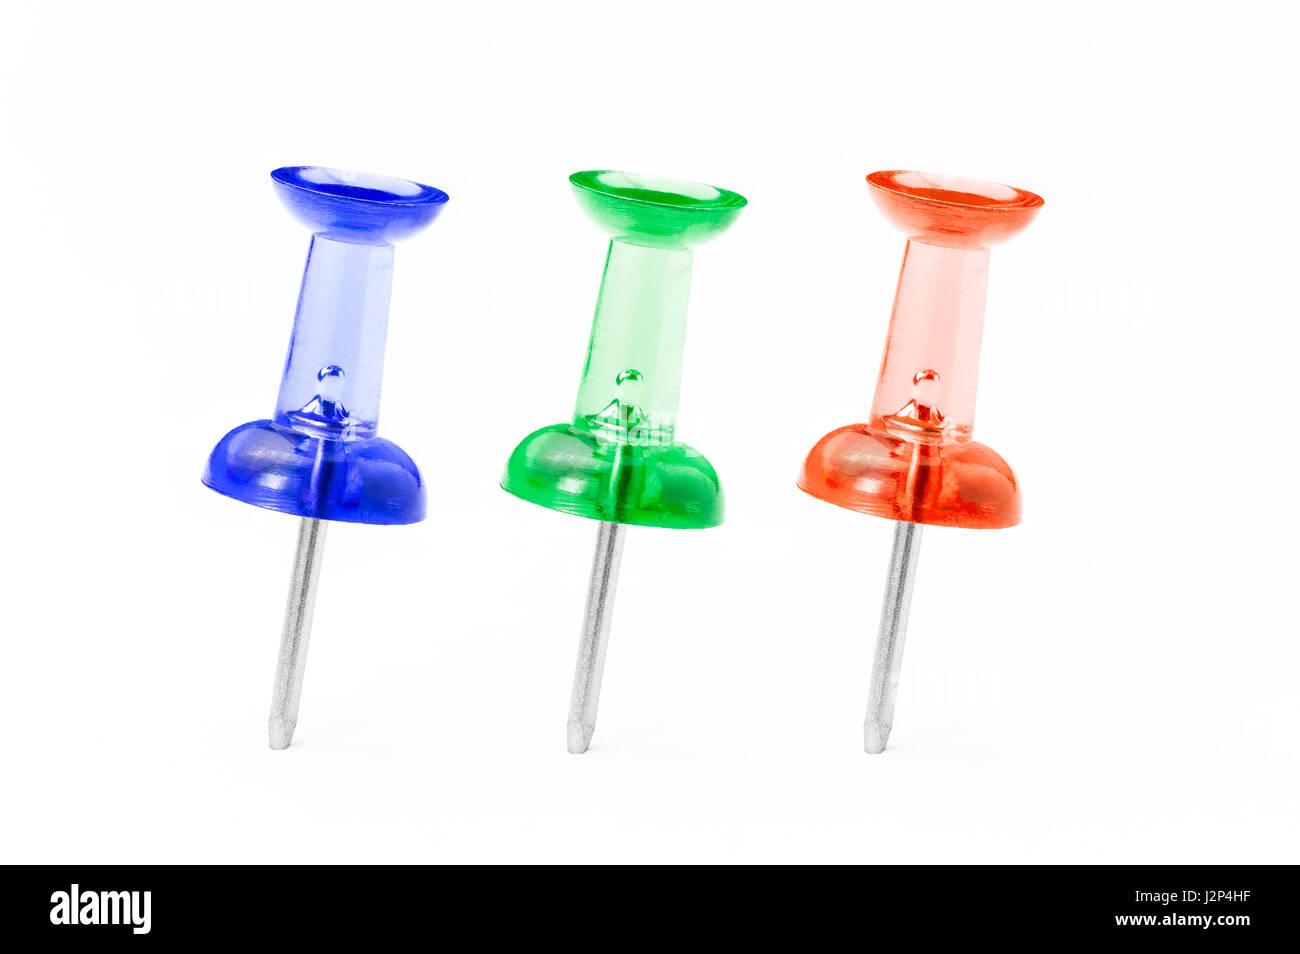 Red, Green, and Blue translucent push pins line up on white background, good for showing idea of primary colors of light Stock Photo